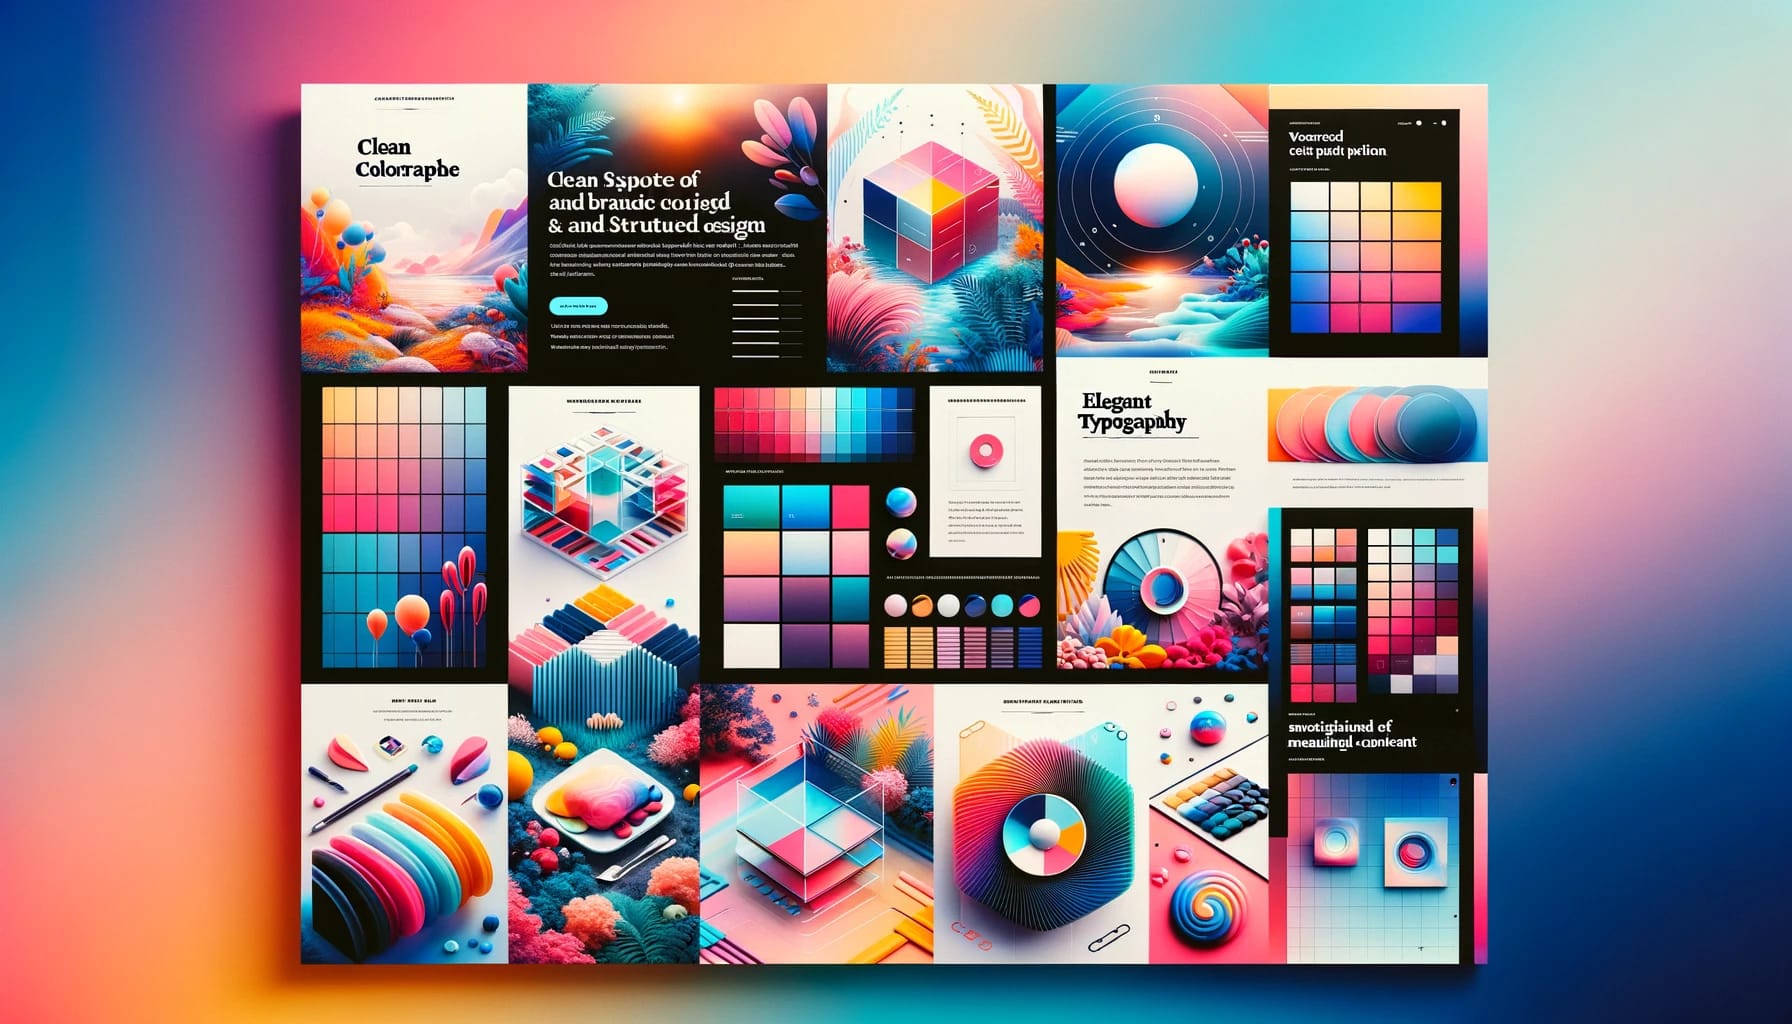 Crafting a Pixel Perfect Brand Identity That Shines Online